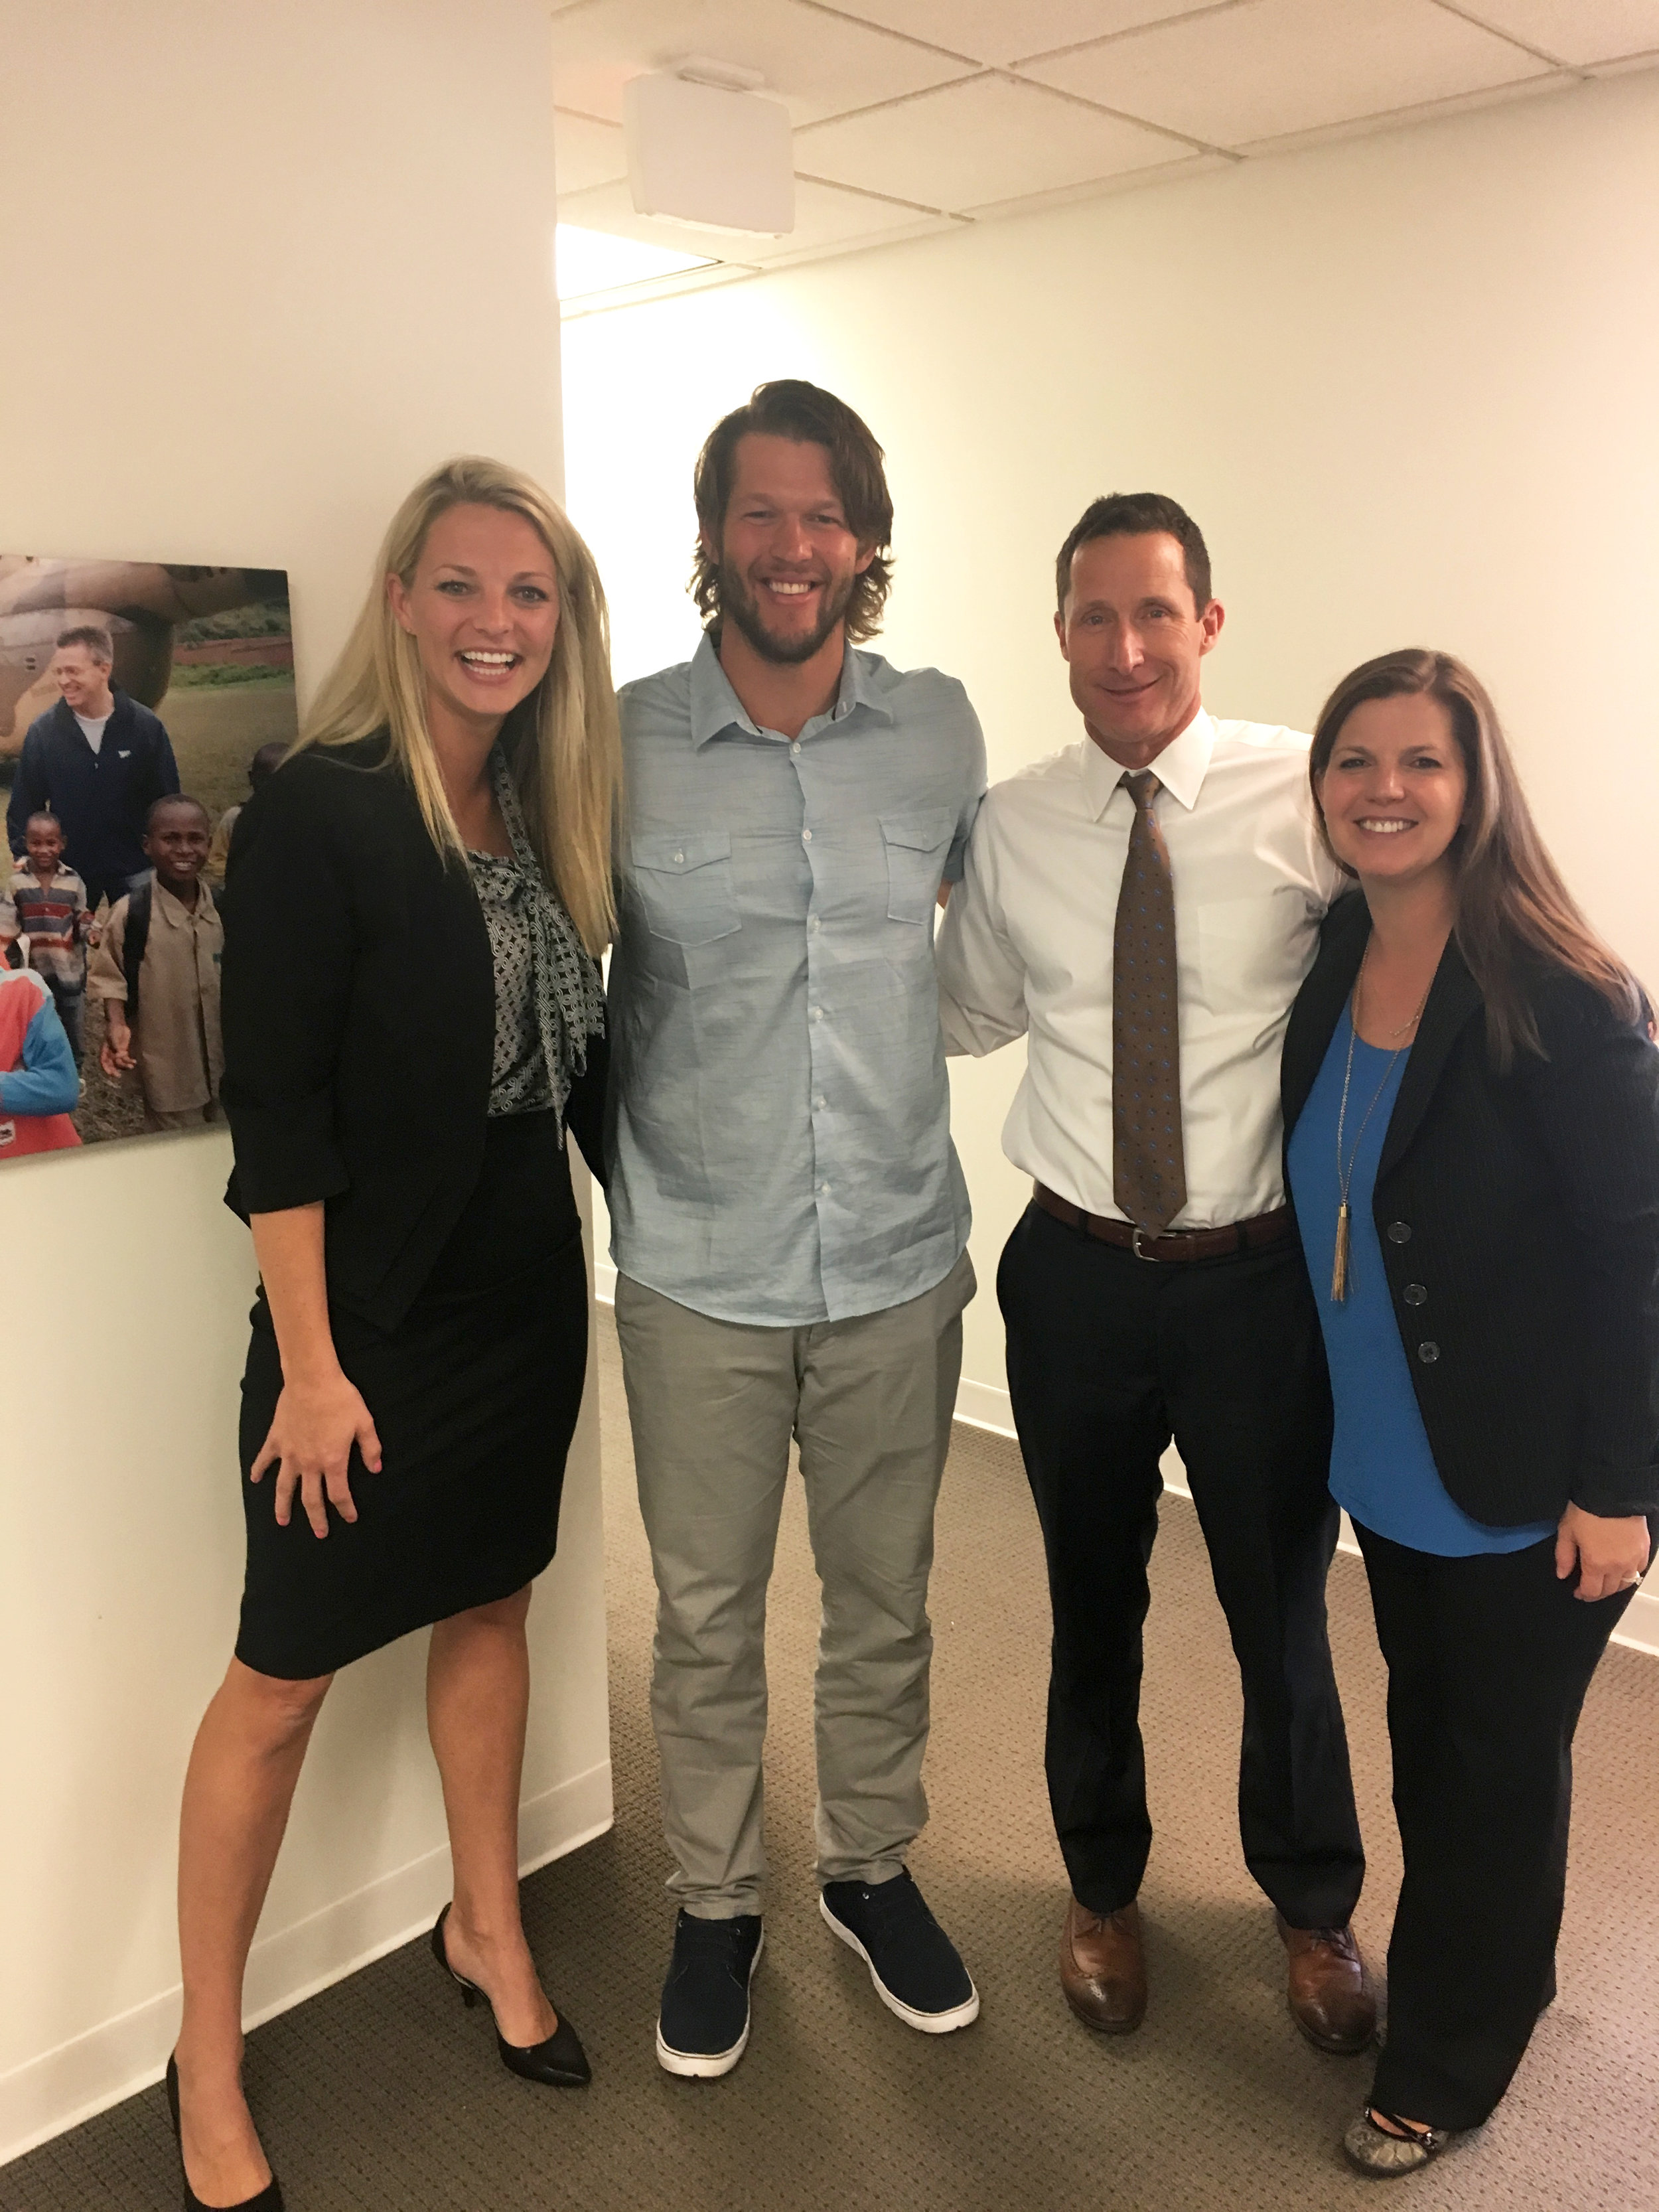 Clayton Kershaw pictured with Mallory, Sean Litton (IJM President) and Jaclyn Willert (Dir of Professional Athlete Partners and Programs) when he visited IJM’s headquarters in 2017.